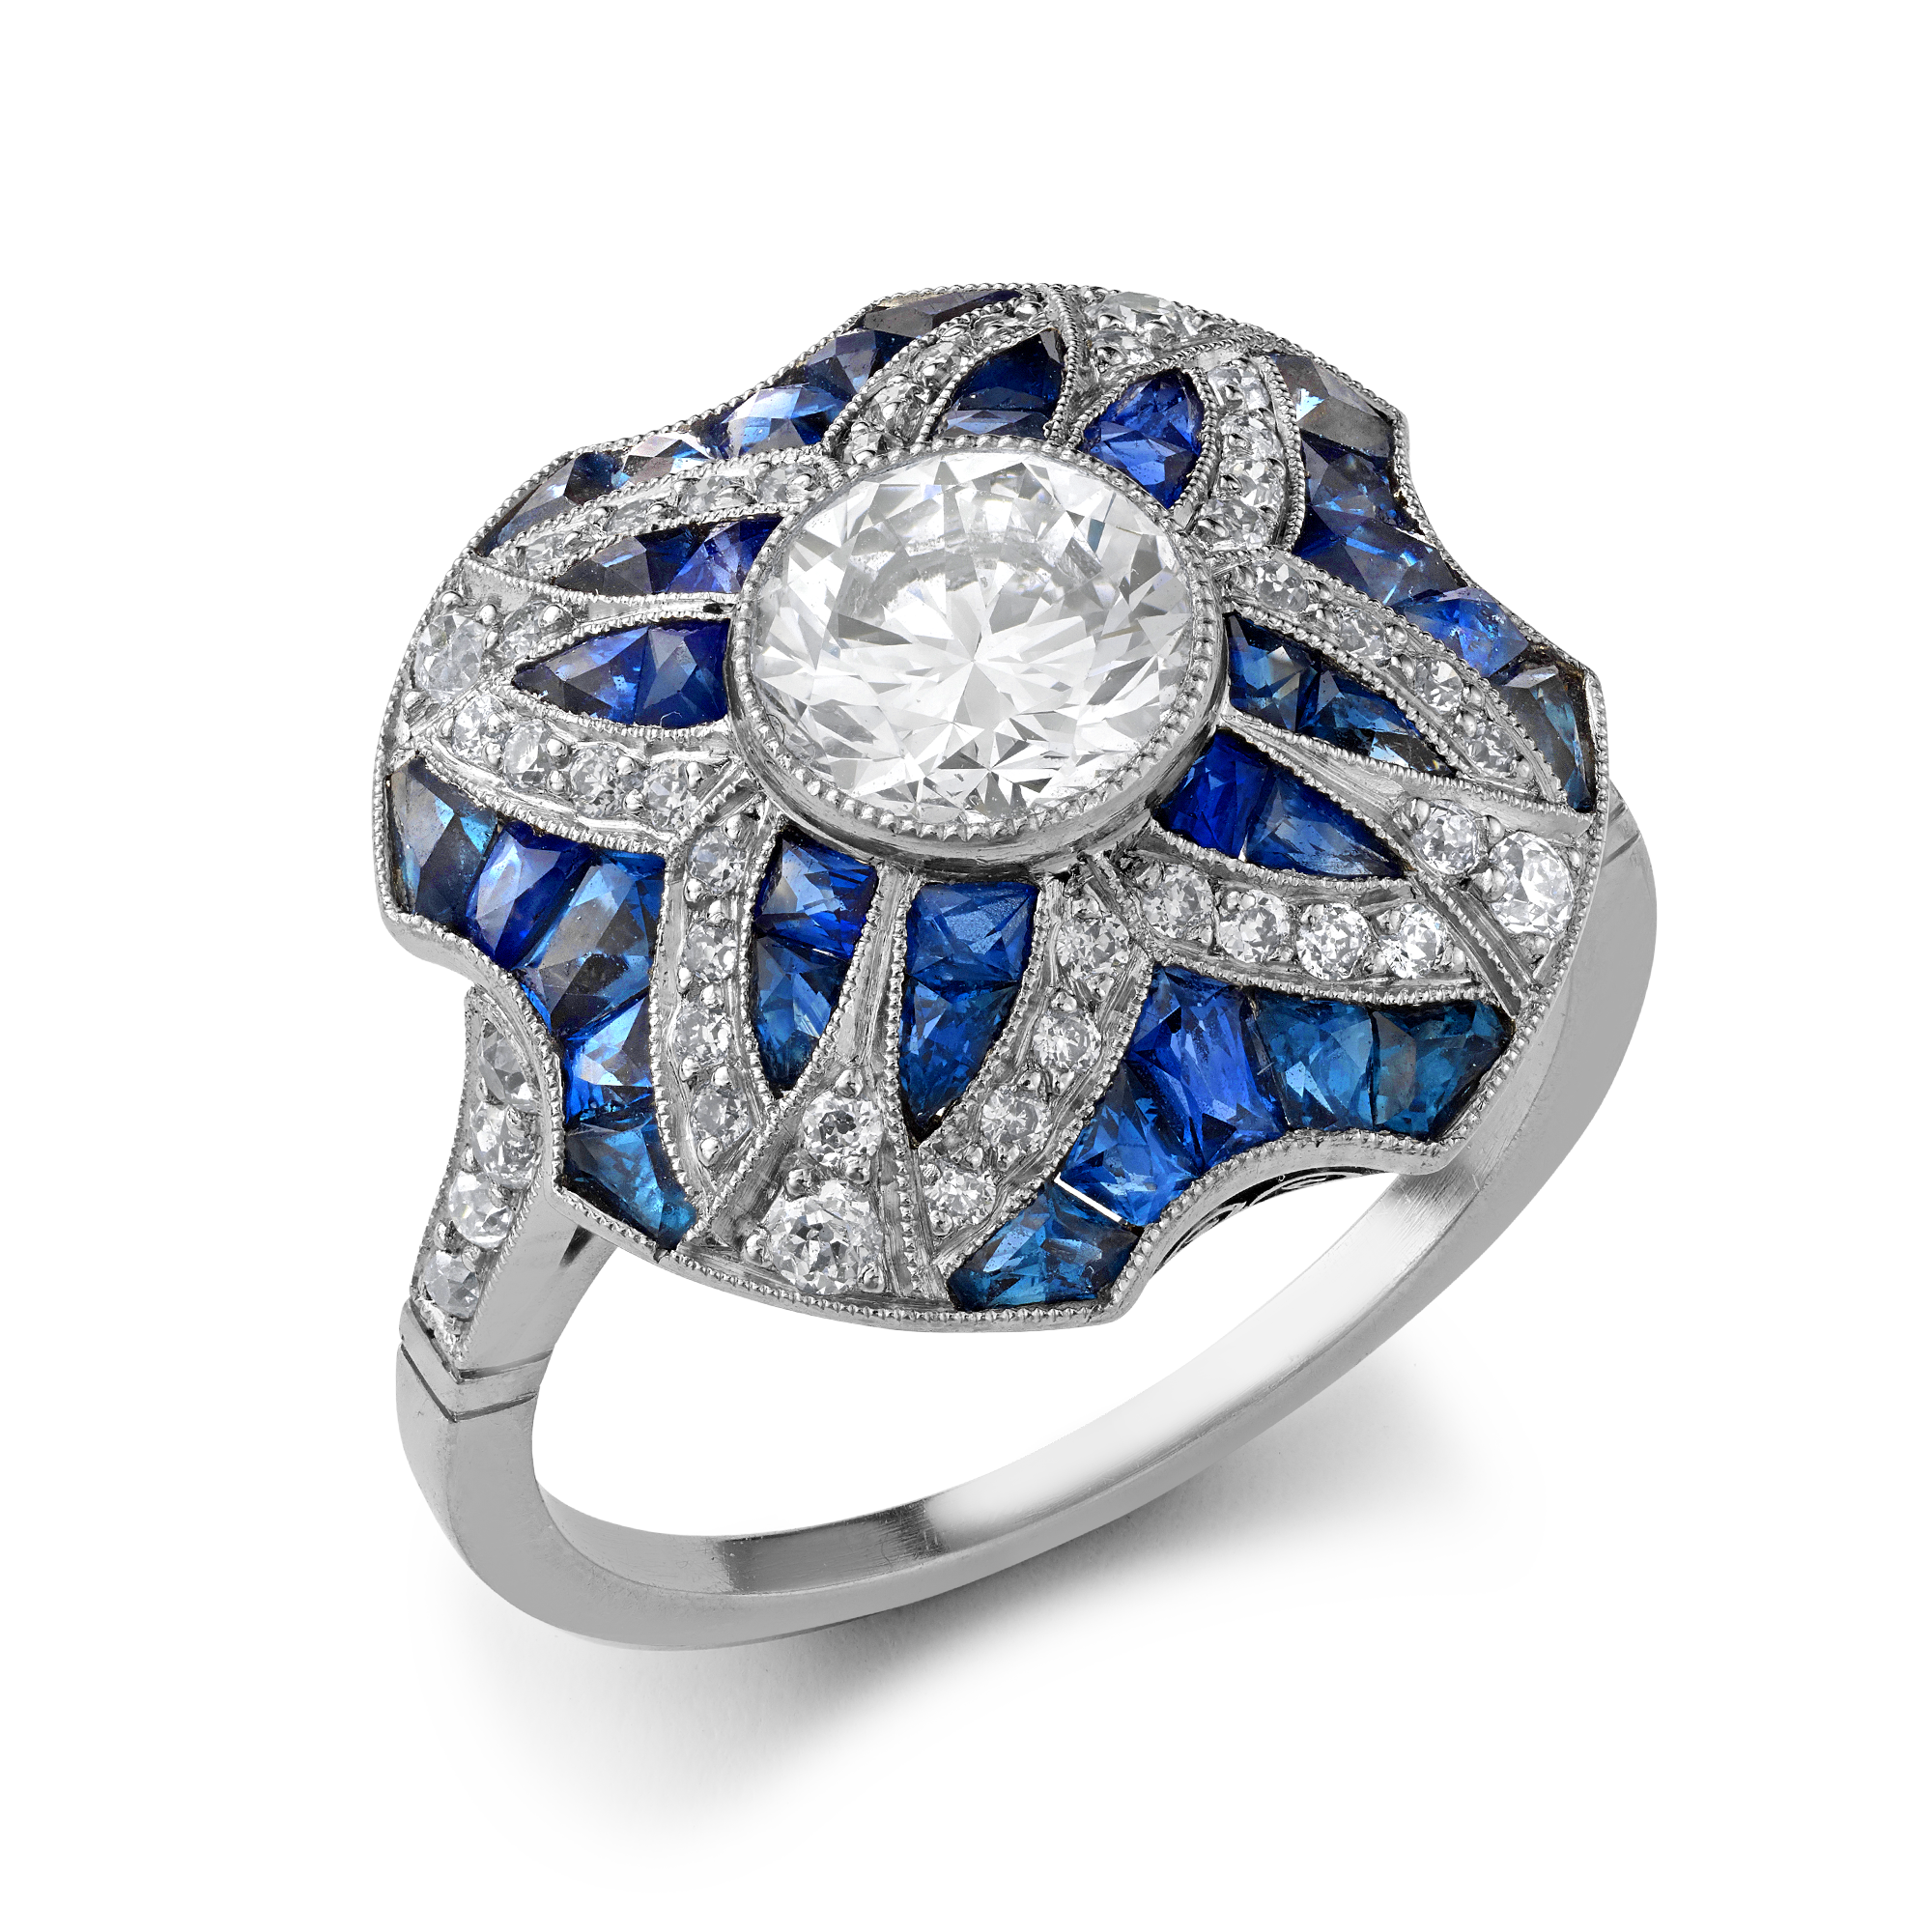 Art Deco Inspired Diamond and Calibre Sapphire Dress Ring with Sapphire and Diamond surround Old Cut, Millegrain Set_1